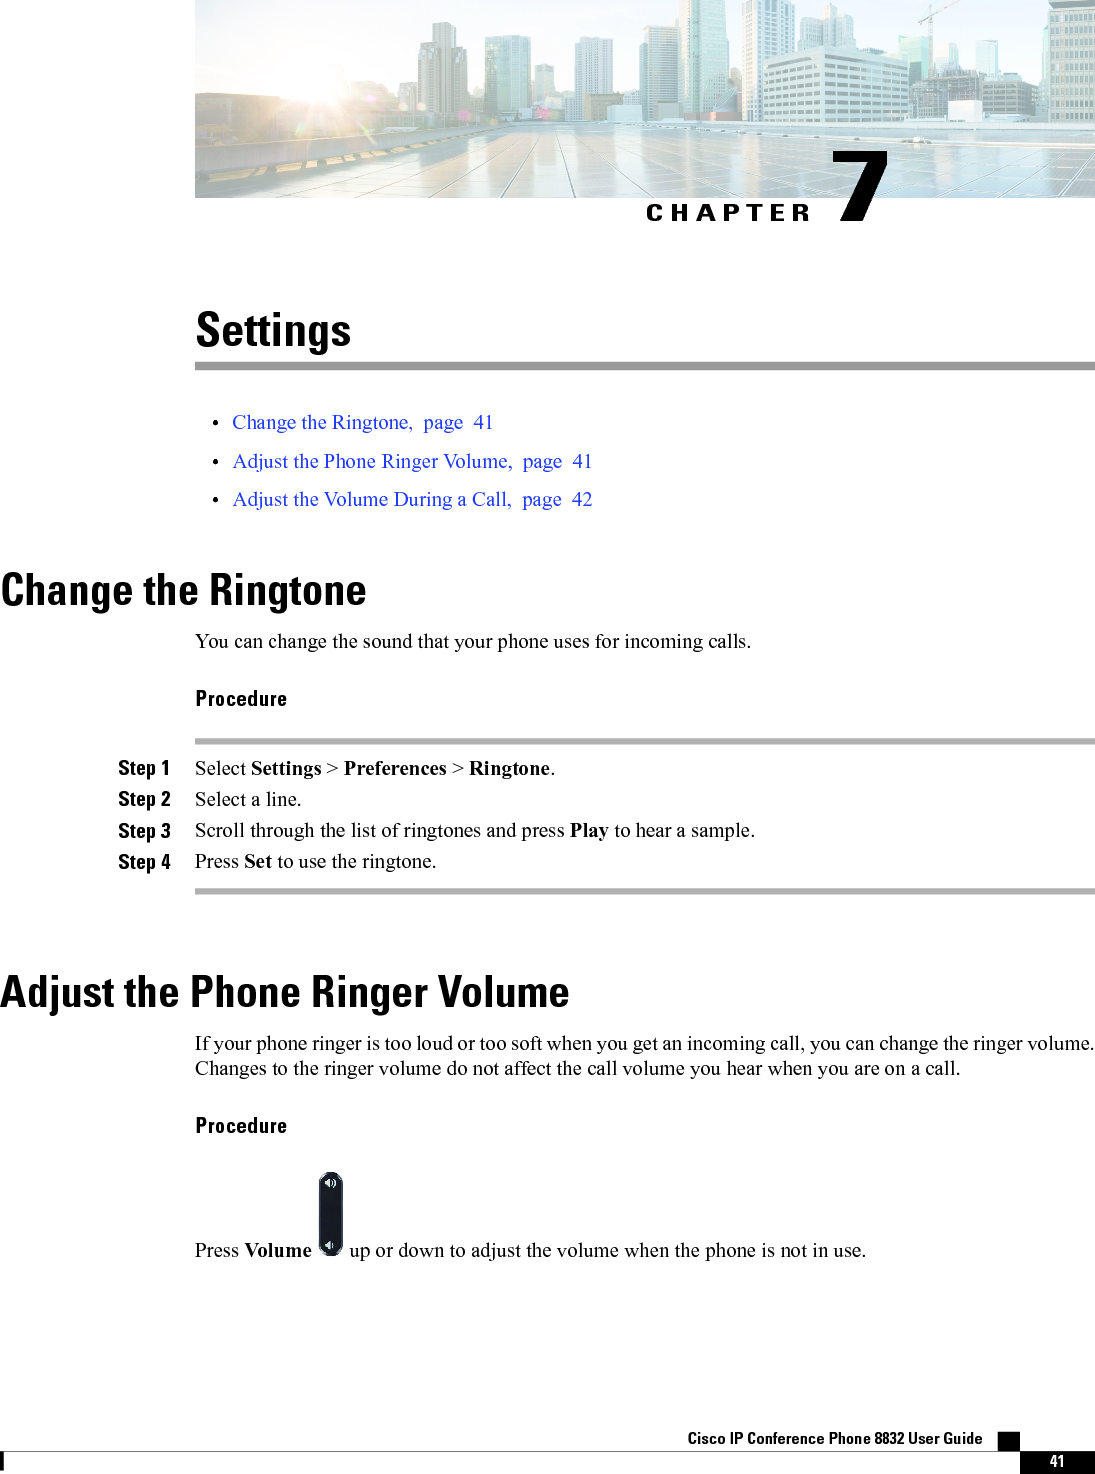 CHAPTER 7Settings•Change the Ringtone, page 41•Adjust the Phone Ringer Volume, page 41•Adjust the Volume During a Call, page 42Change the RingtoneYou can change the sound that your phone uses for incoming calls.ProcedureStep 1 Select Settings &gt;Preferences &gt;Ringtone.Step 2 Select a line.Step 3 Scroll through the list of ringtones and press Play to hear a sample.Step 4 Press Set to use the ringtone.Adjust the Phone Ringer VolumeIf your phone ringer is too loud or too soft when you get an incoming call, you can change the ringer volume.Changes to the ringer volume do not affect the call volume you hear when you are on a call.ProcedurePress Volume up or down to adjust the volume when the phone is not in use.Cisco IP Conference Phone 8832 User Guide    41